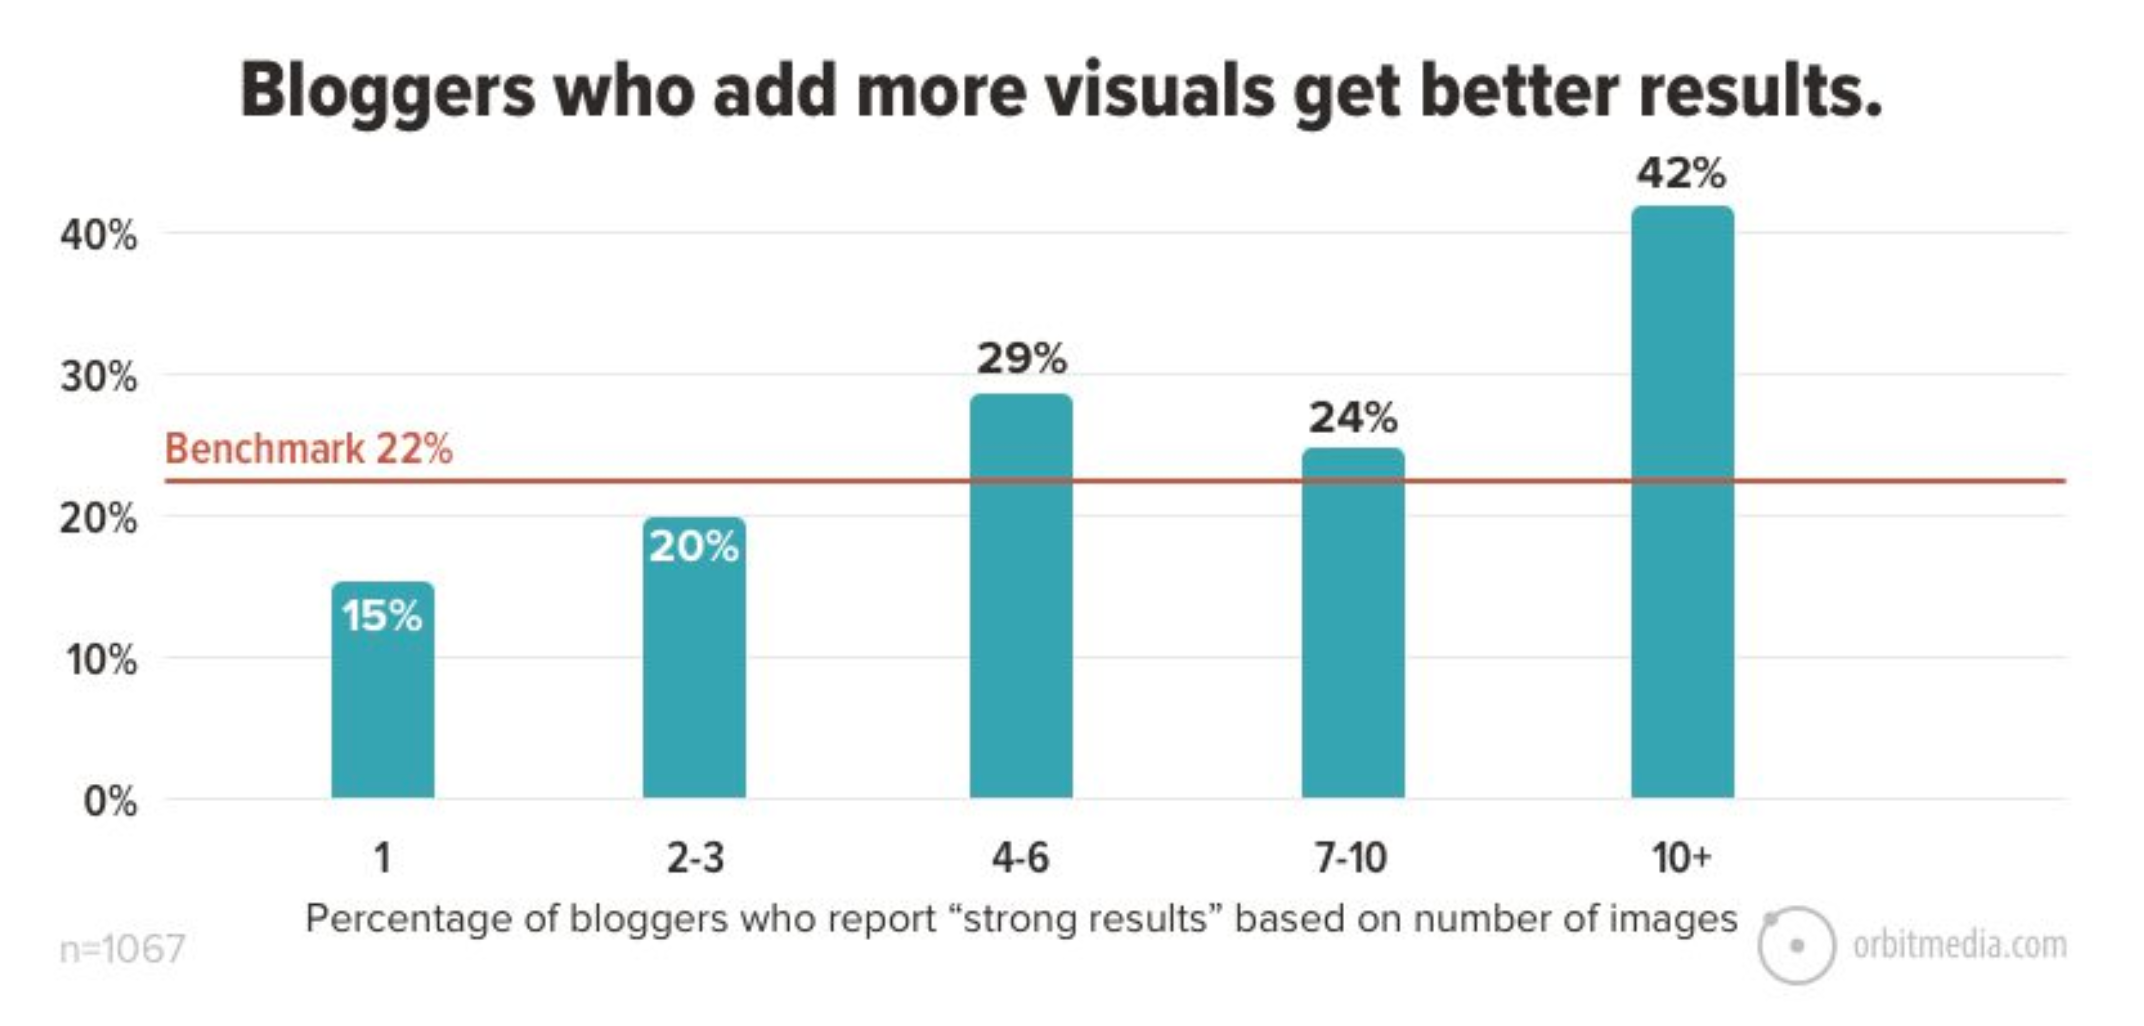 Bloggers Who Add More Visuals Get Better Results